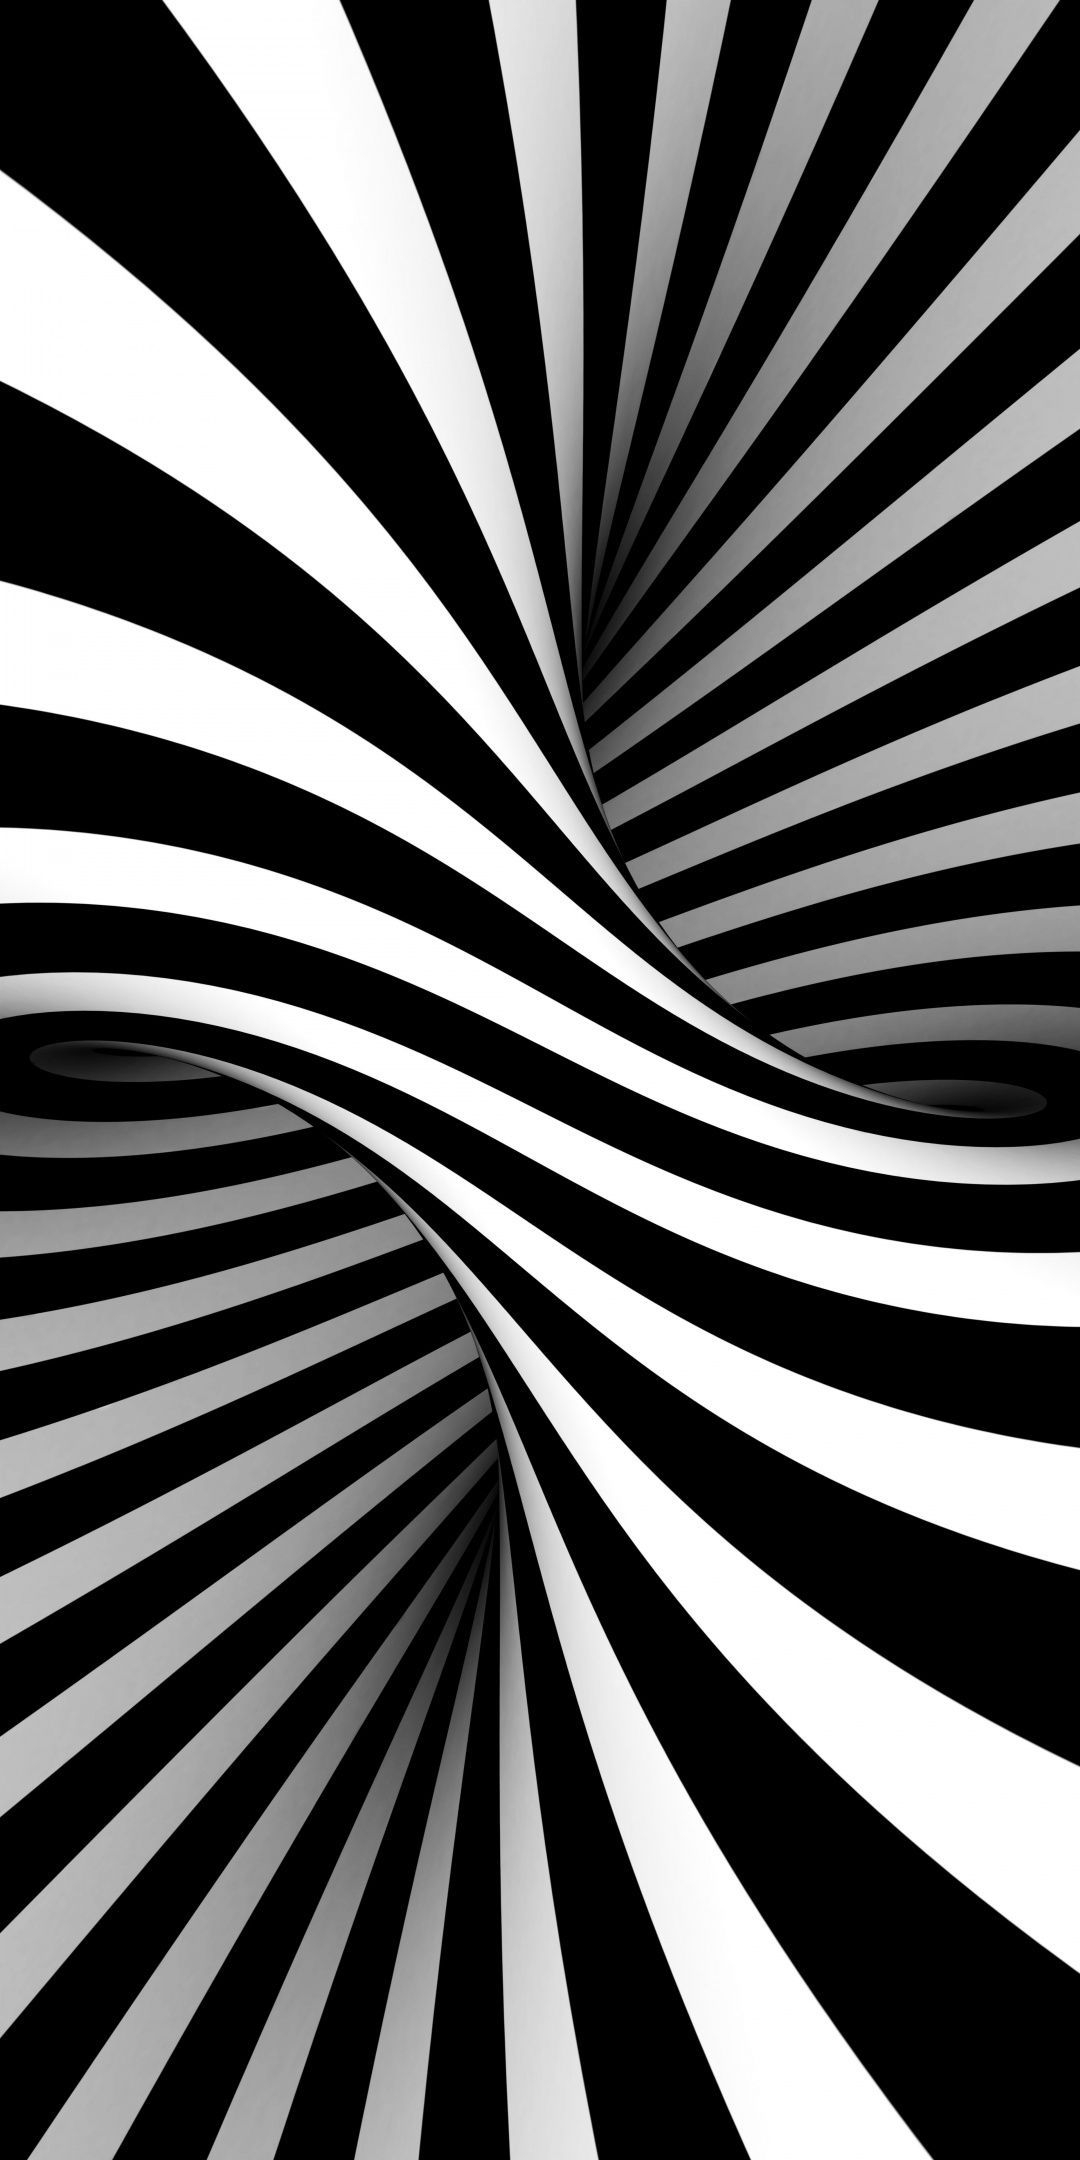 1080x2160 Black and White Illusion Wallpapers Top Free Black and White Illusion Backgrounds